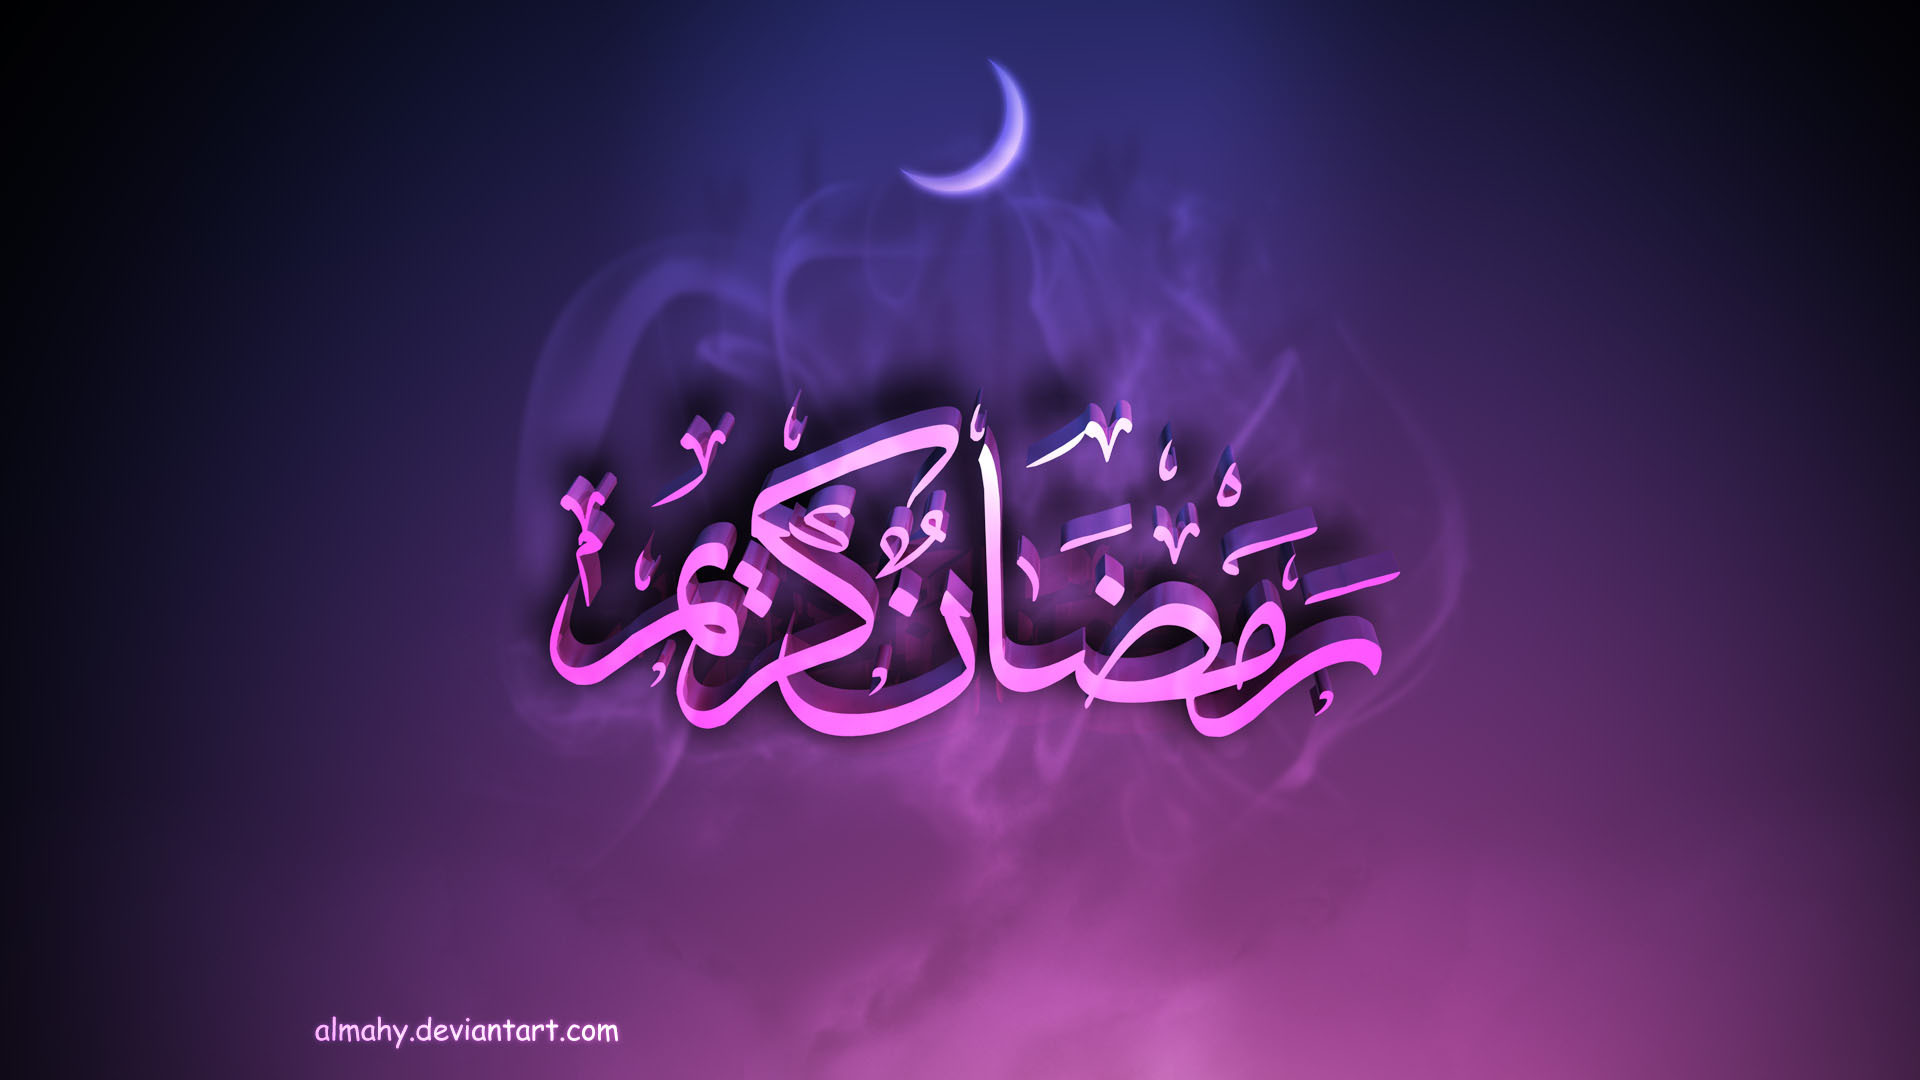 Best Ramadan 2014 wallpapers and images - wallpapers 